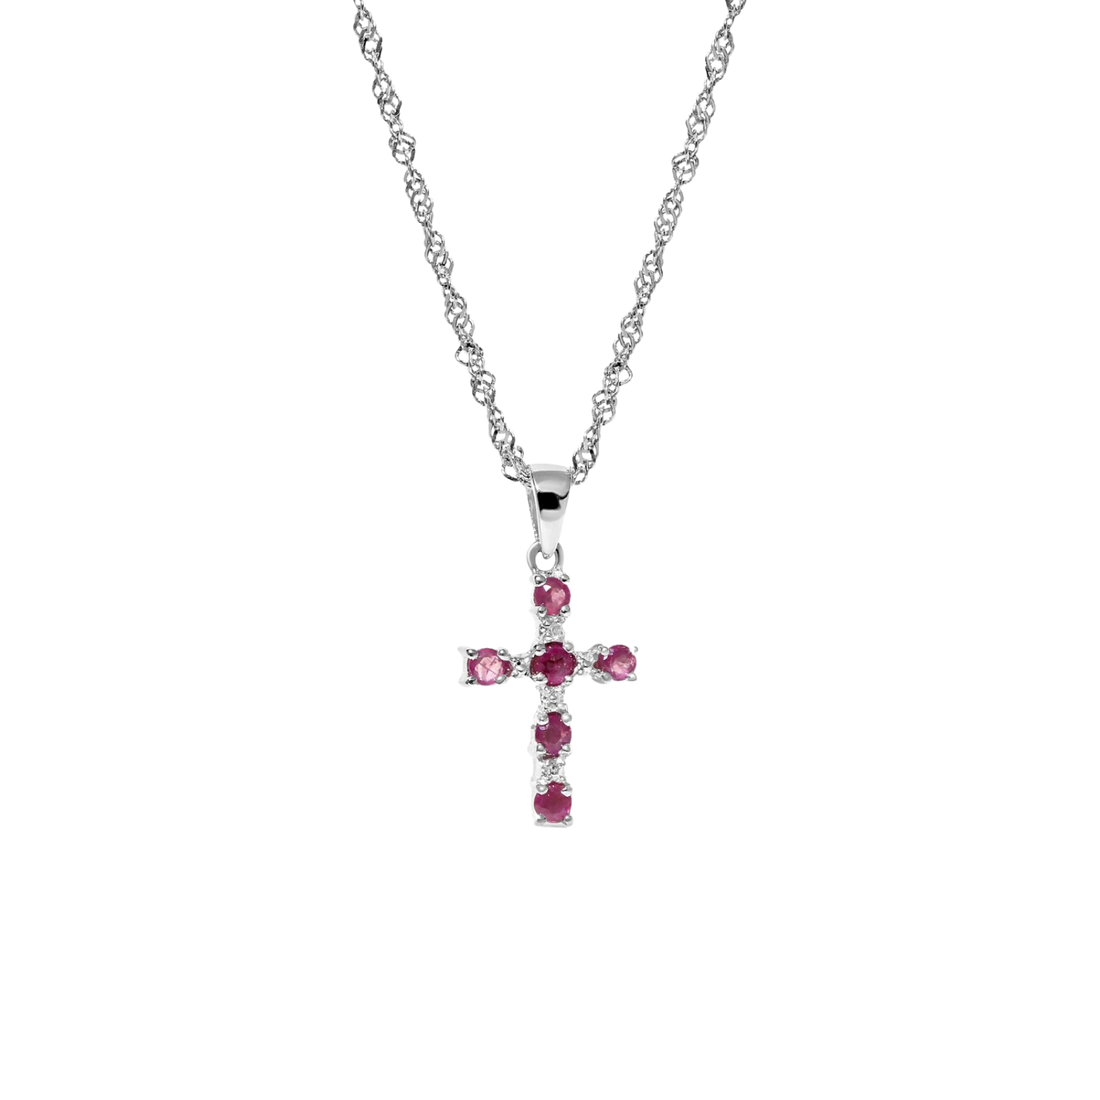 real ruby cross canada, Ruby silver cross pendant canada, large silver cross pendant toronto on, silver necklace womens canada